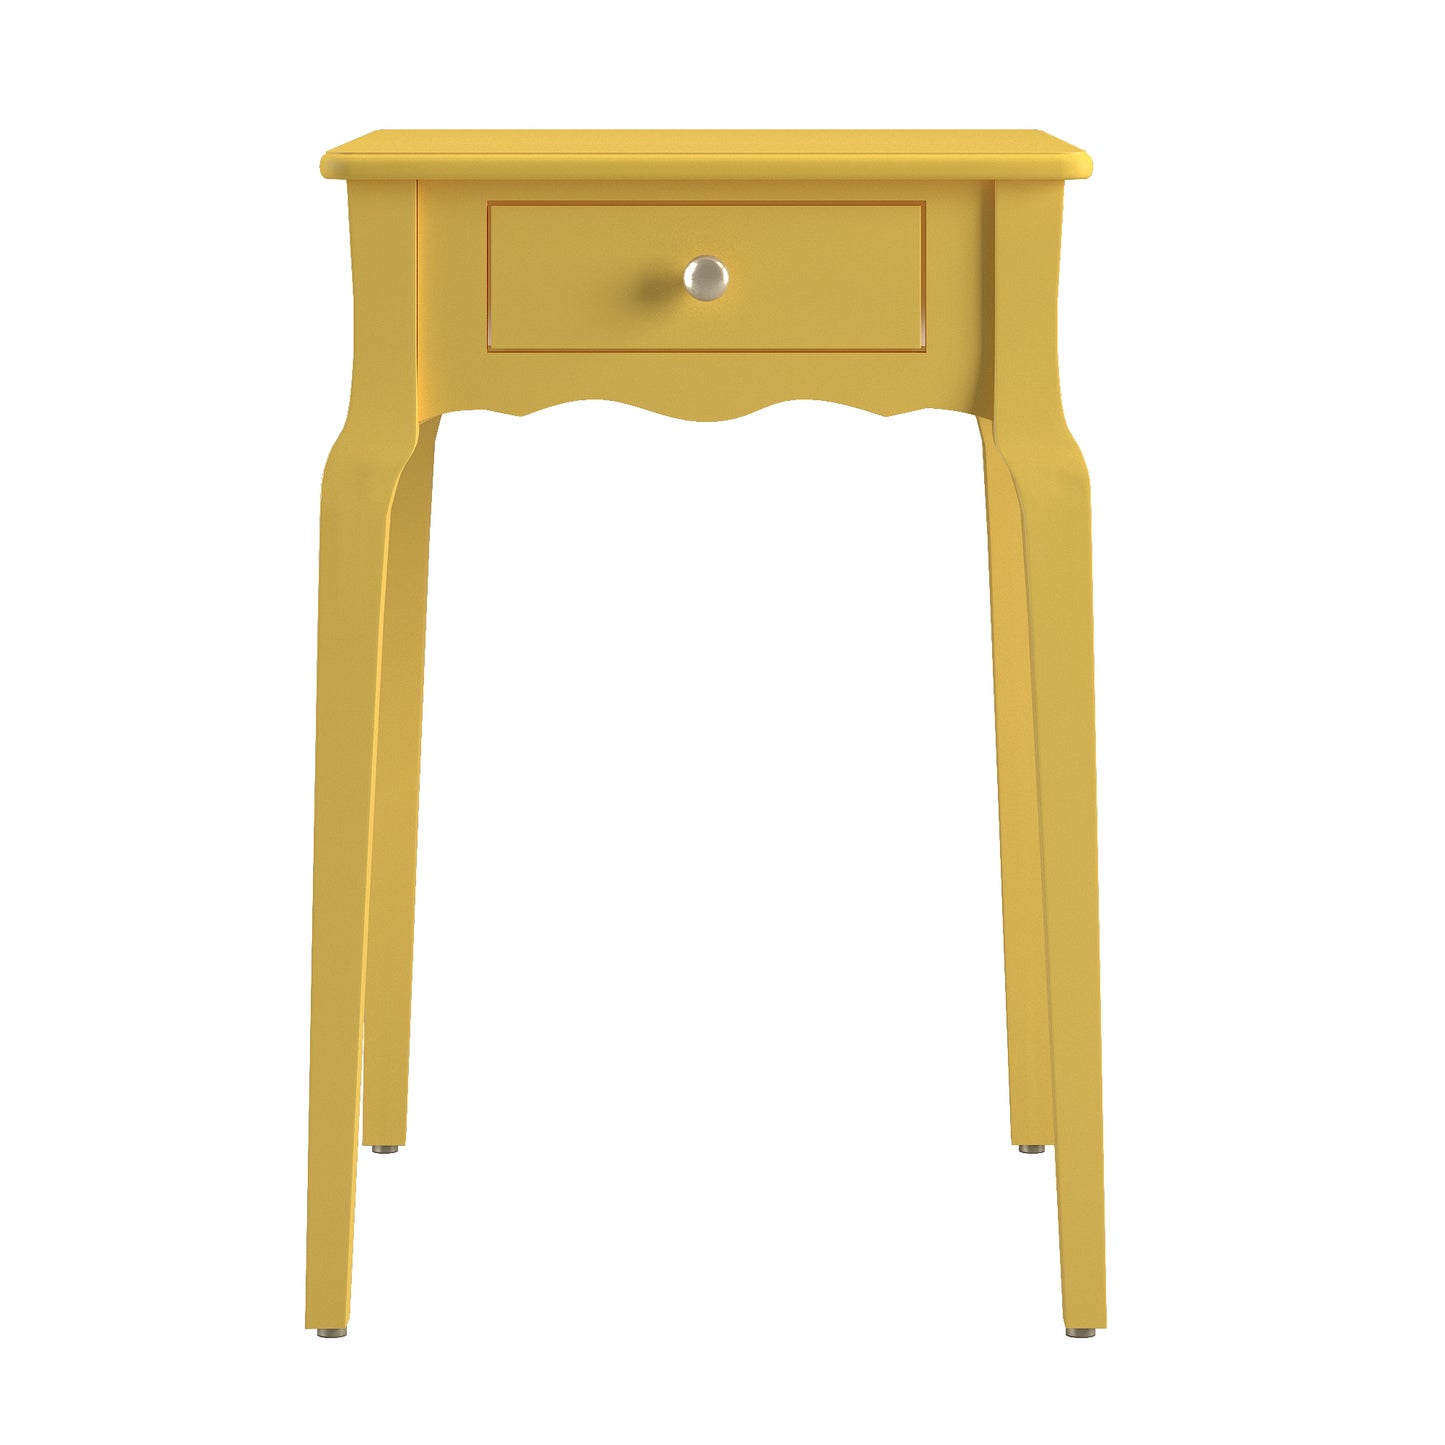 1-Drawer Wood Side Table - Yellow